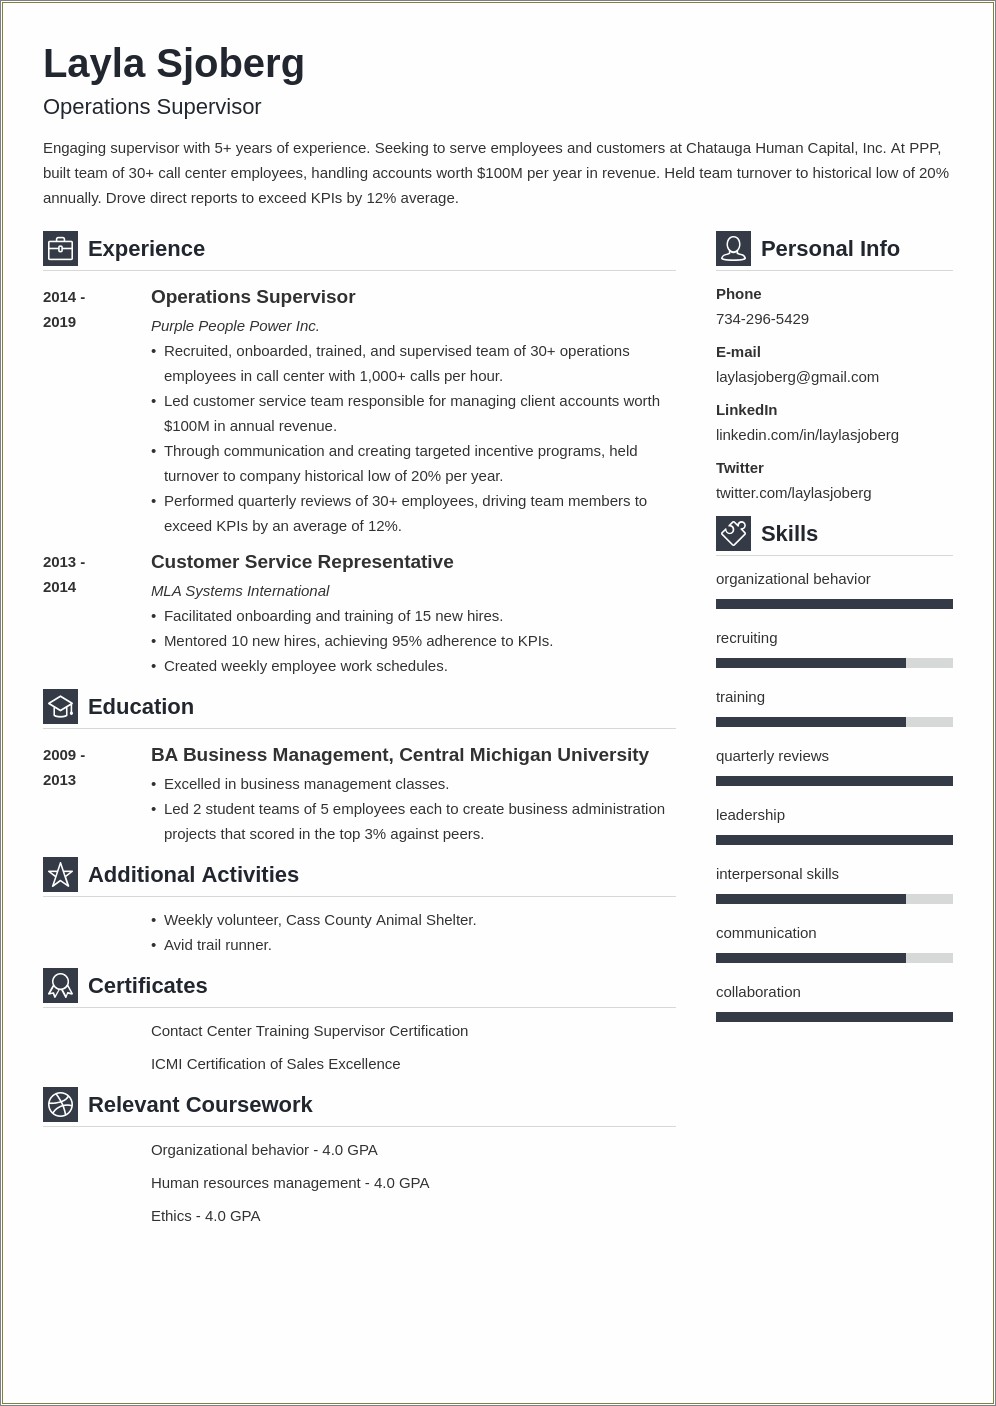 Job Discription Created Employee Schedules On Resume